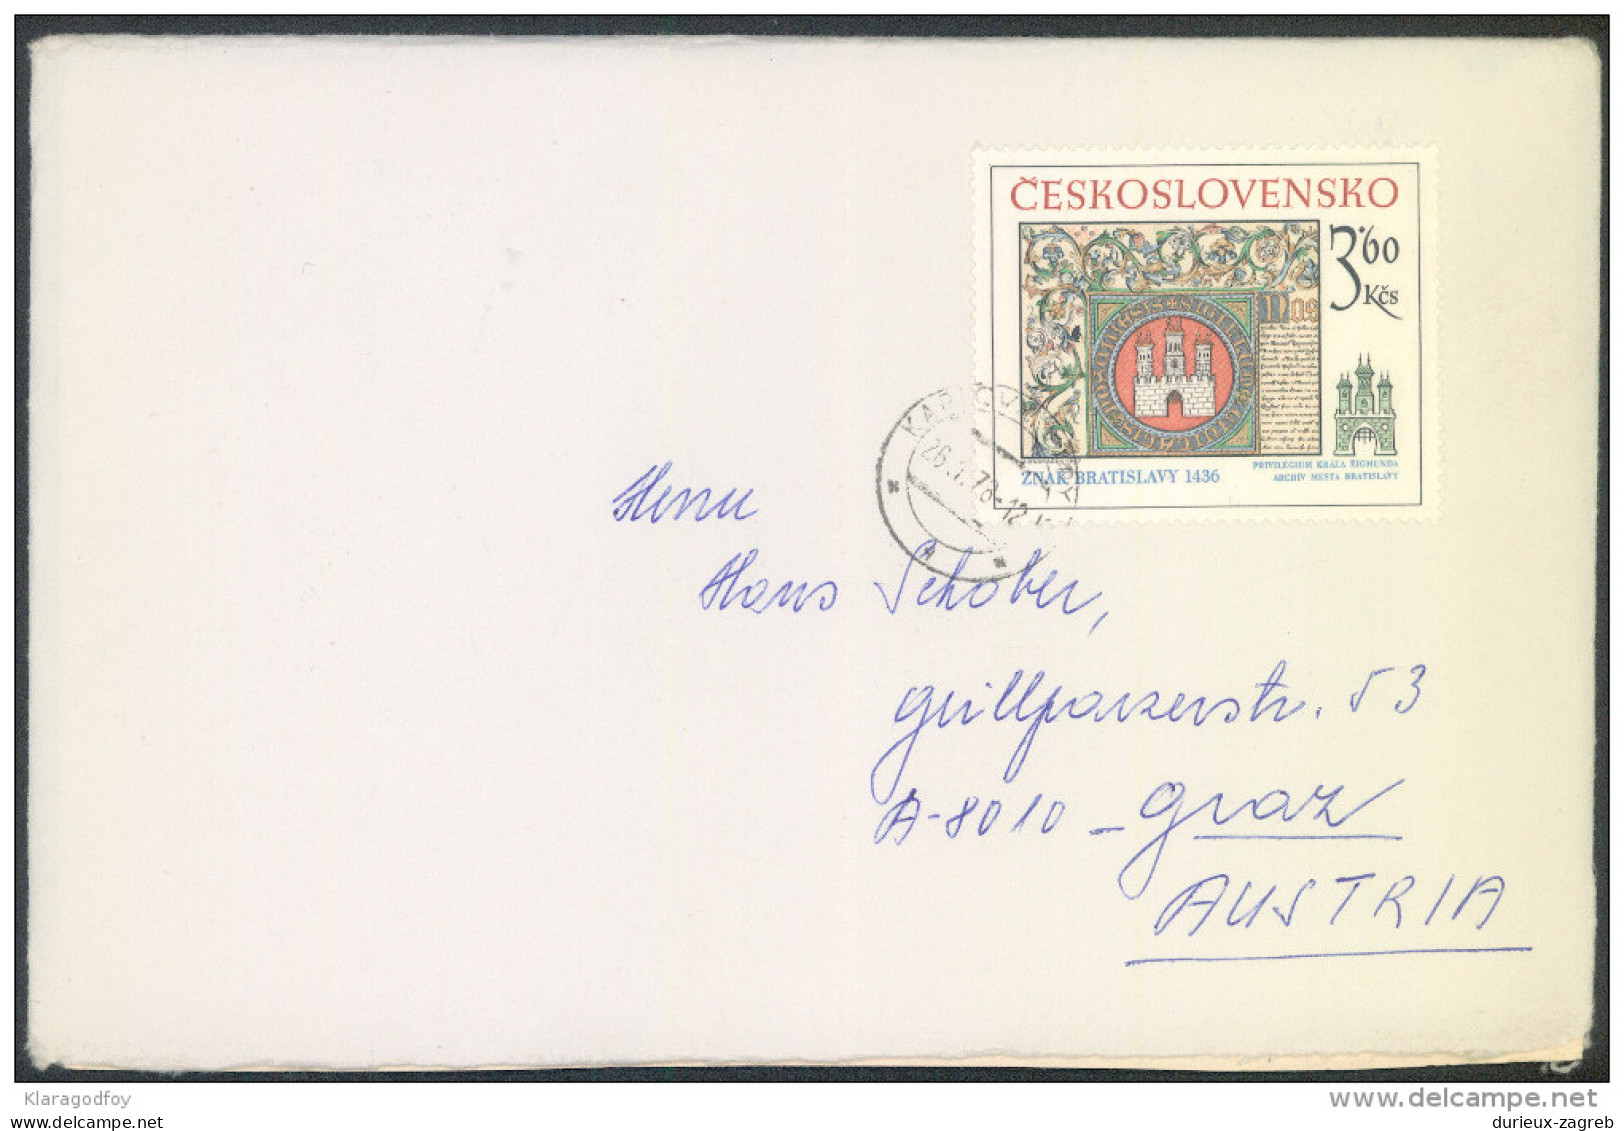 Czechoslovakia Letter Cover Travelled 1978 Bb161028 - Covers & Documents